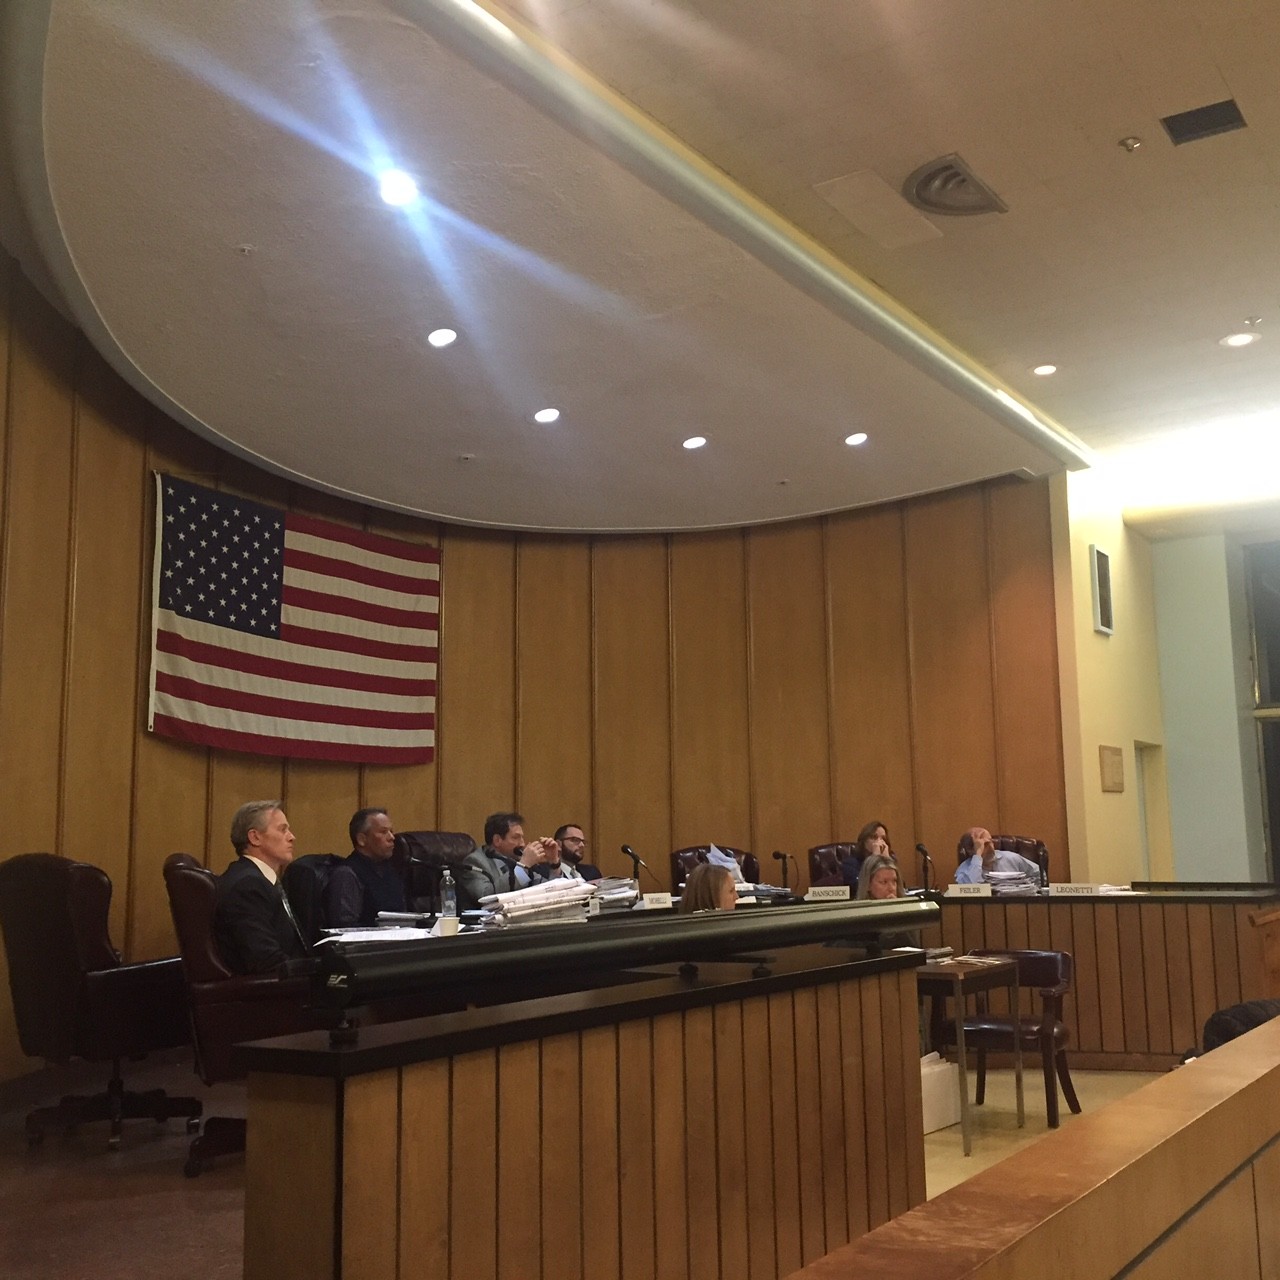 The zoning board is expected to make a decision at next month’s meeting.